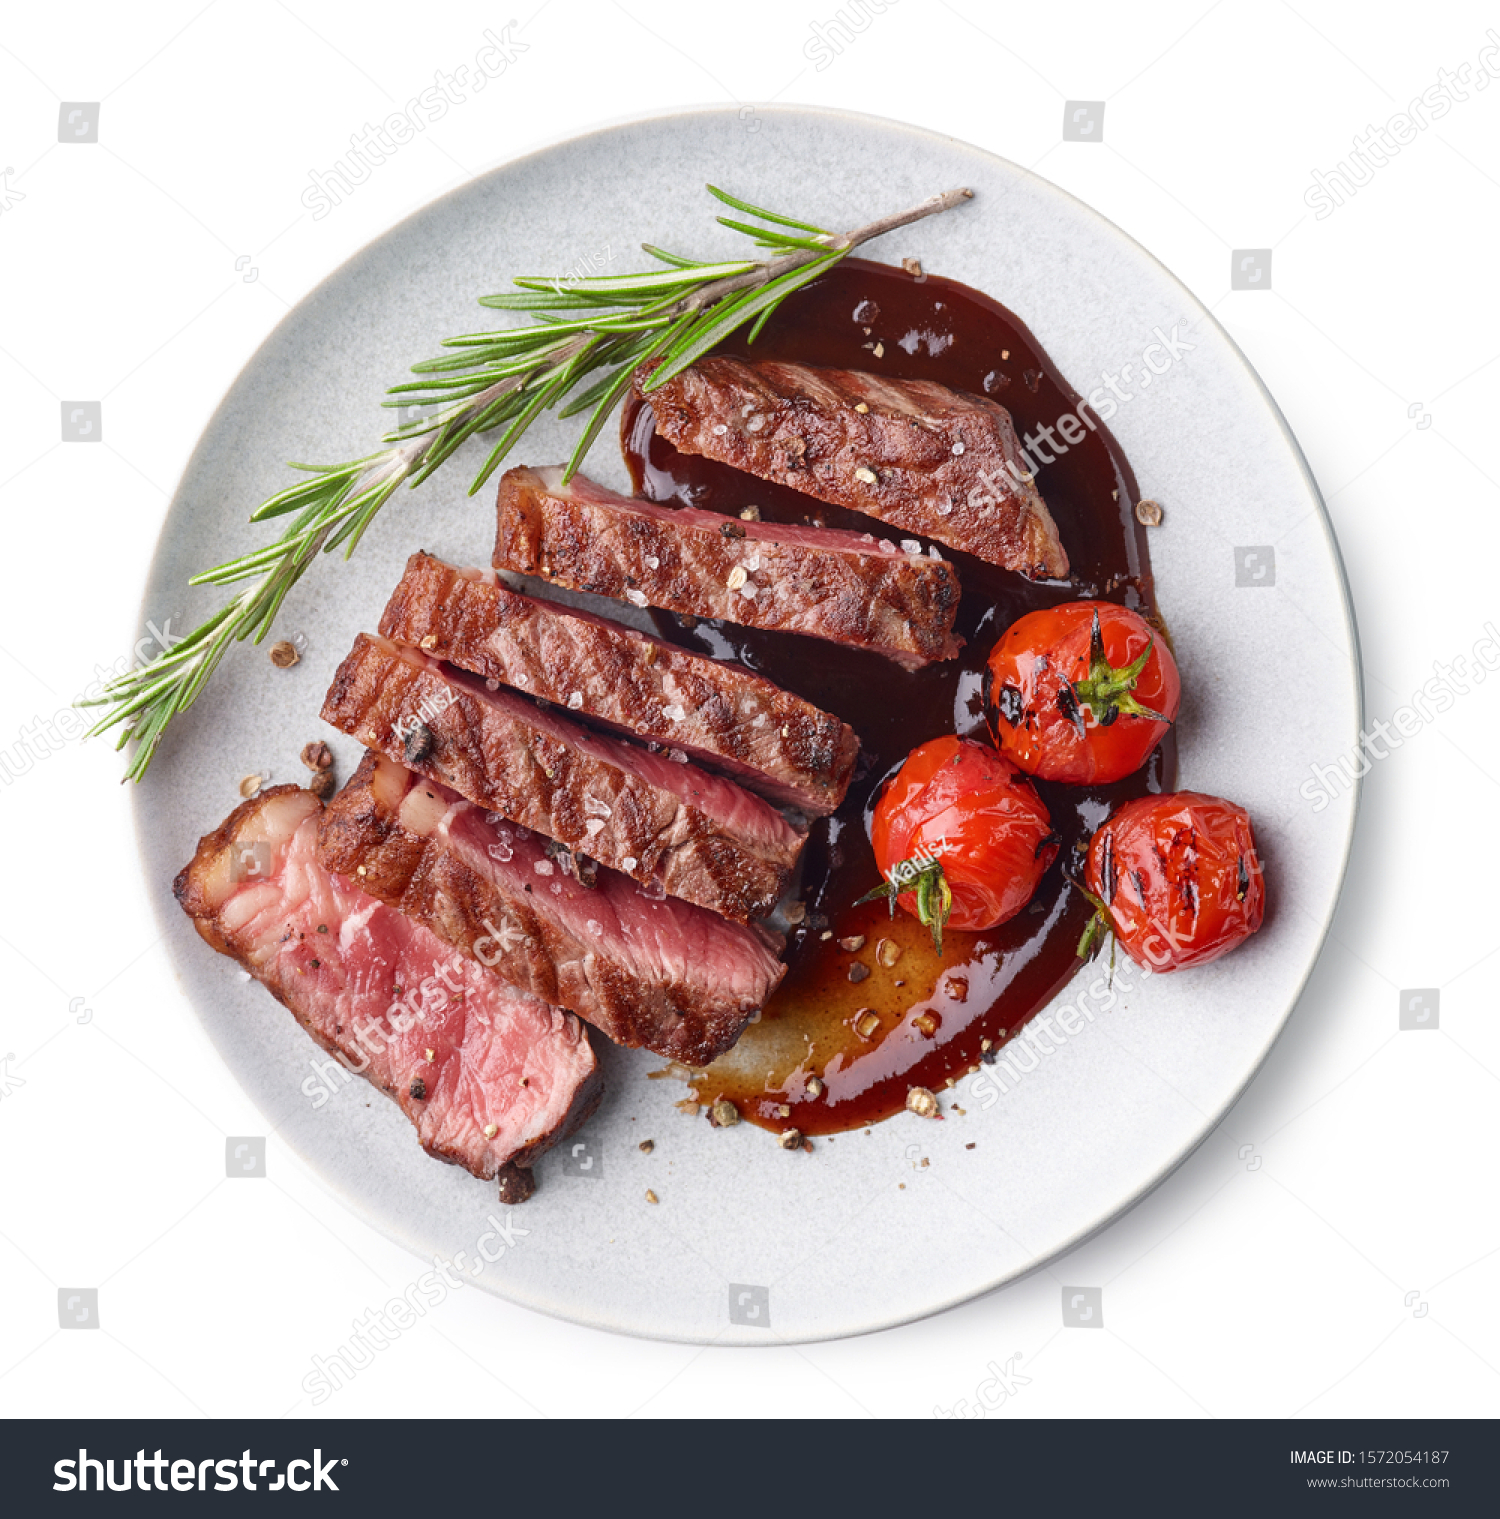 Grilled sliced Beef Steak with tomatoes and rosemary on a plate Isolated on white background top view #1572054187